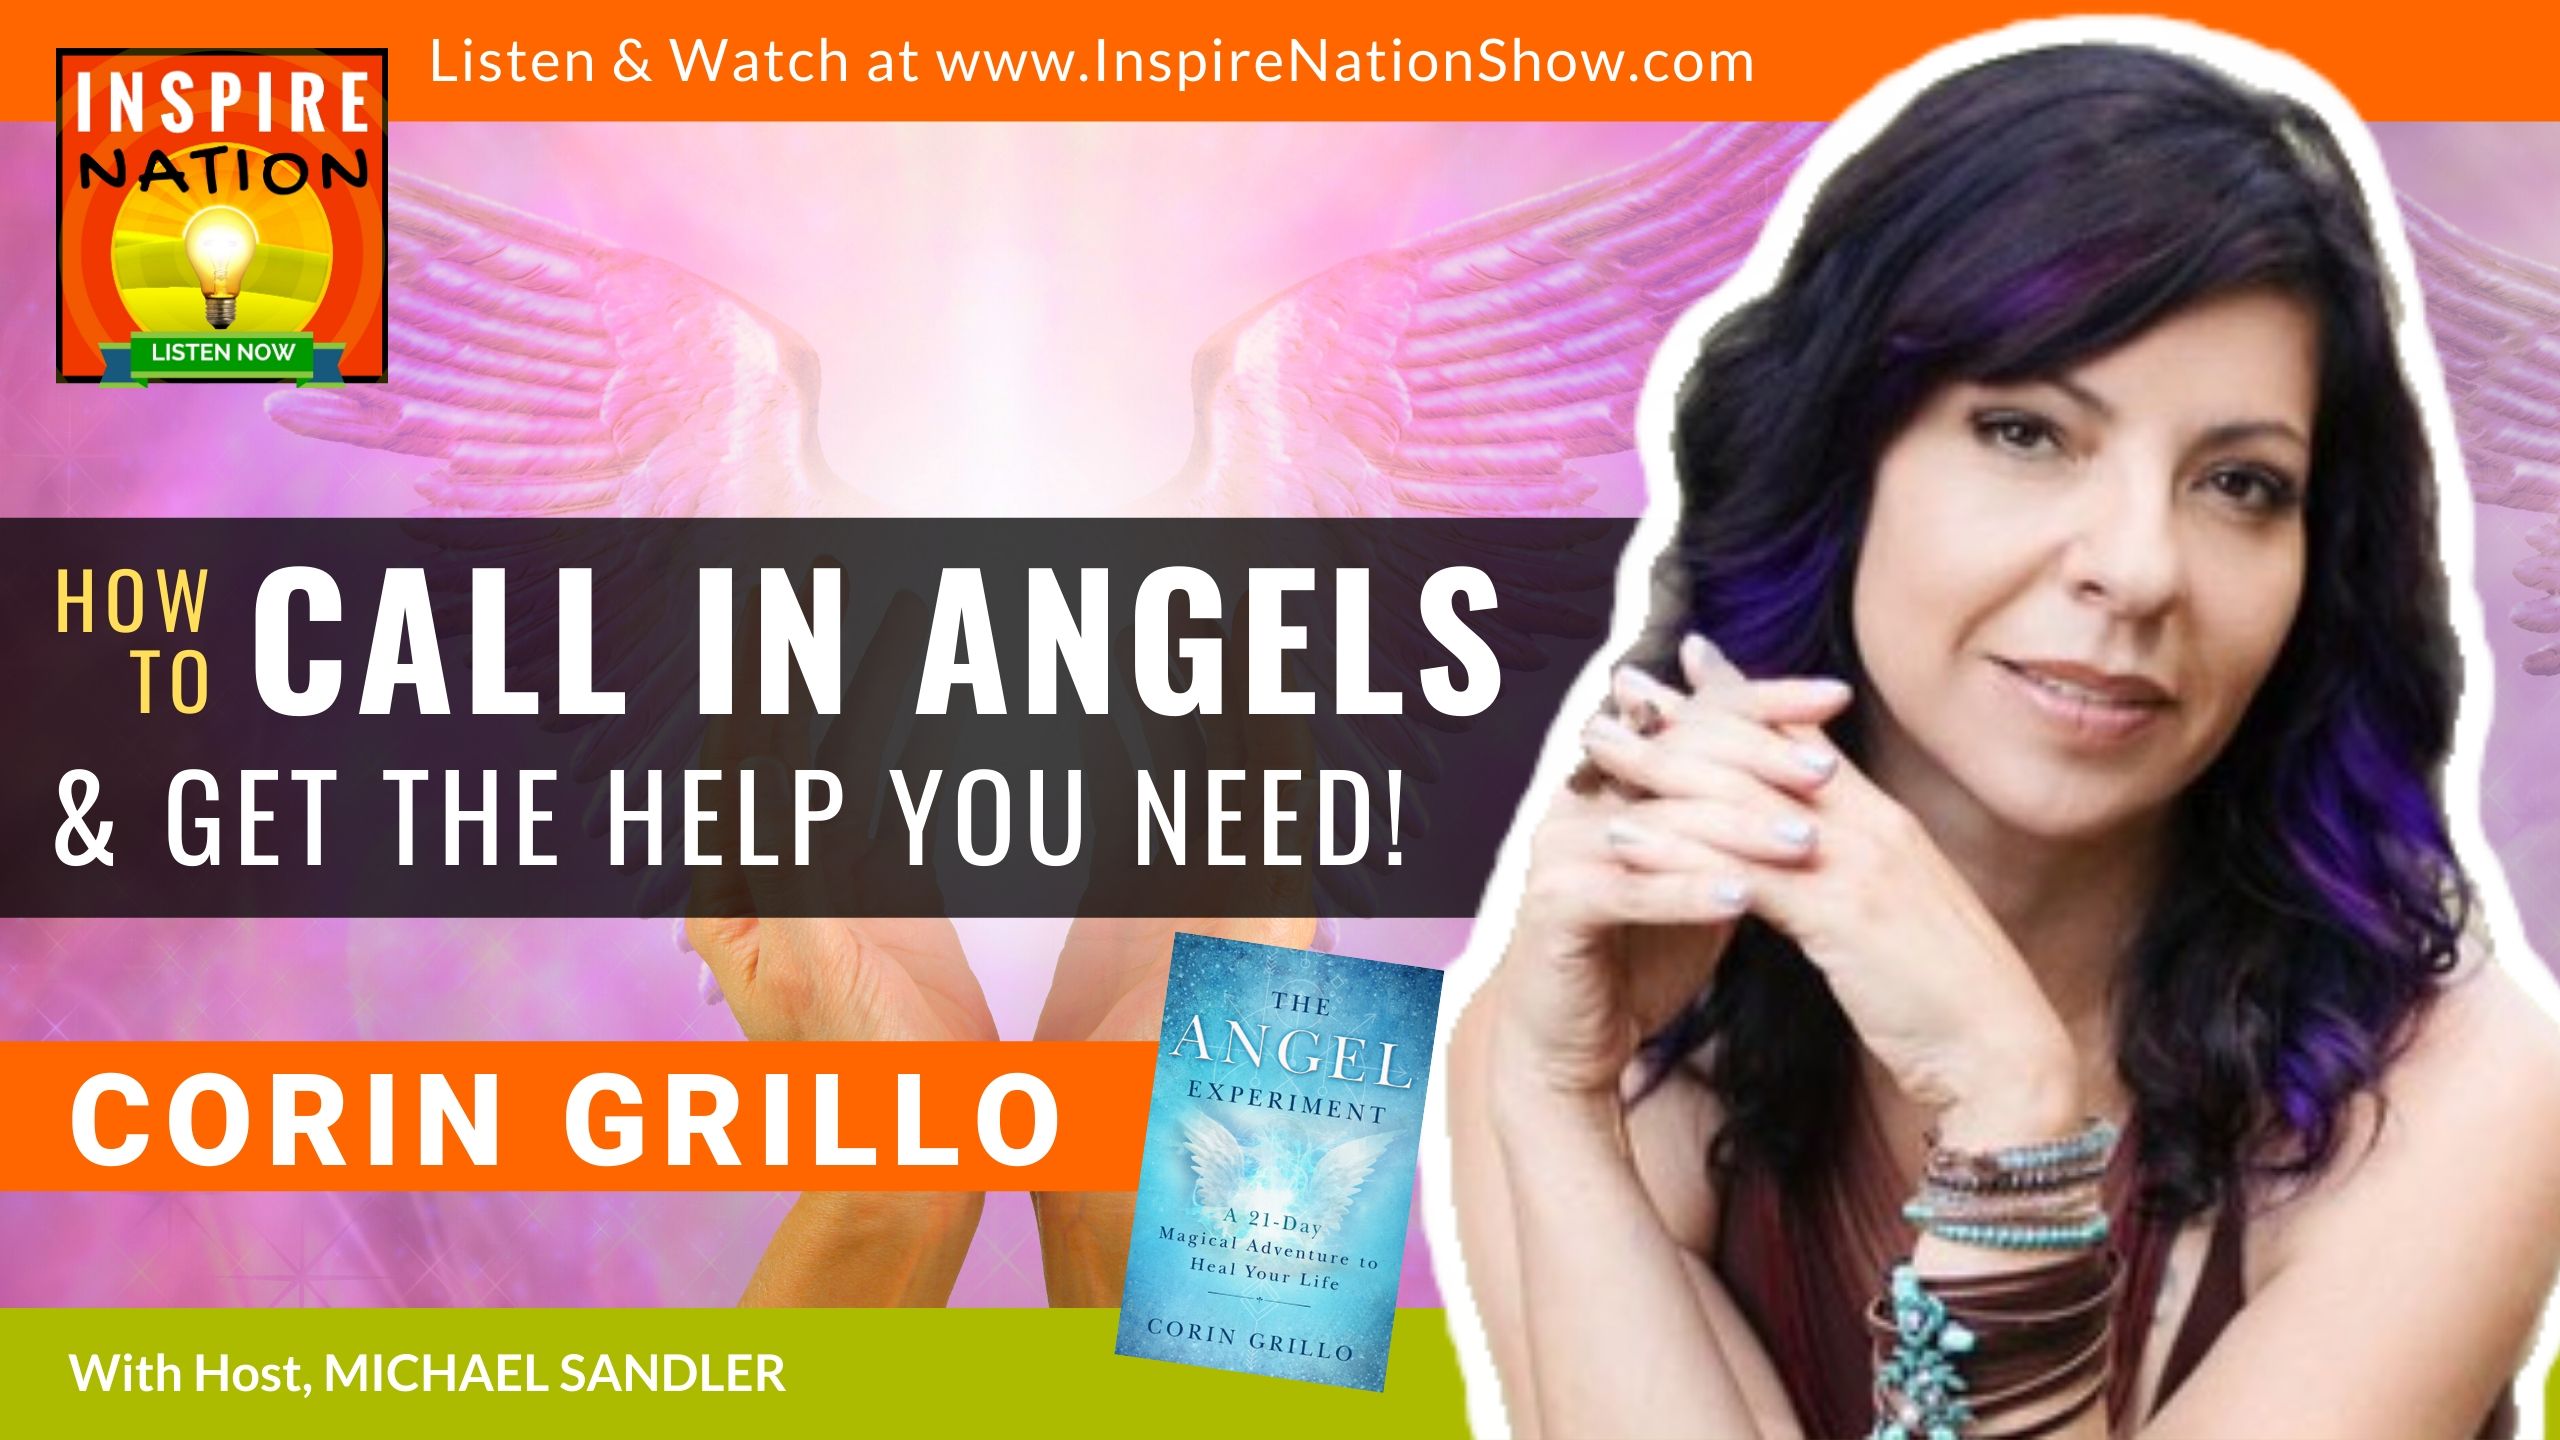 Michael Sandler interviews Corin Grillo on connecting to angels so you can get the help you need!